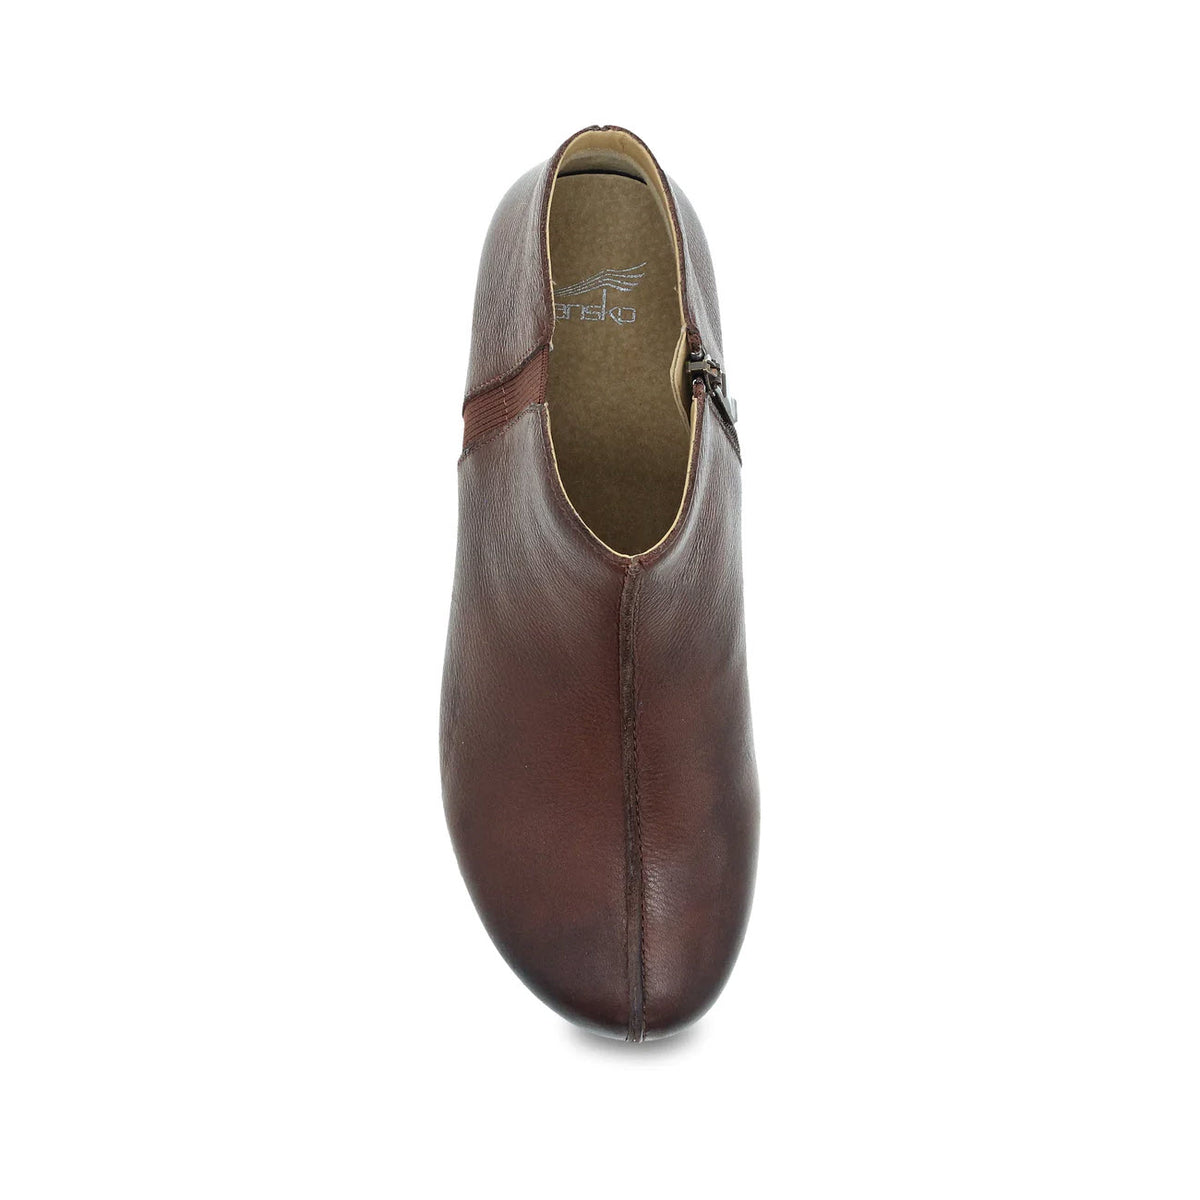 Top view of a single brown Dansko Makara bootie on a white background.